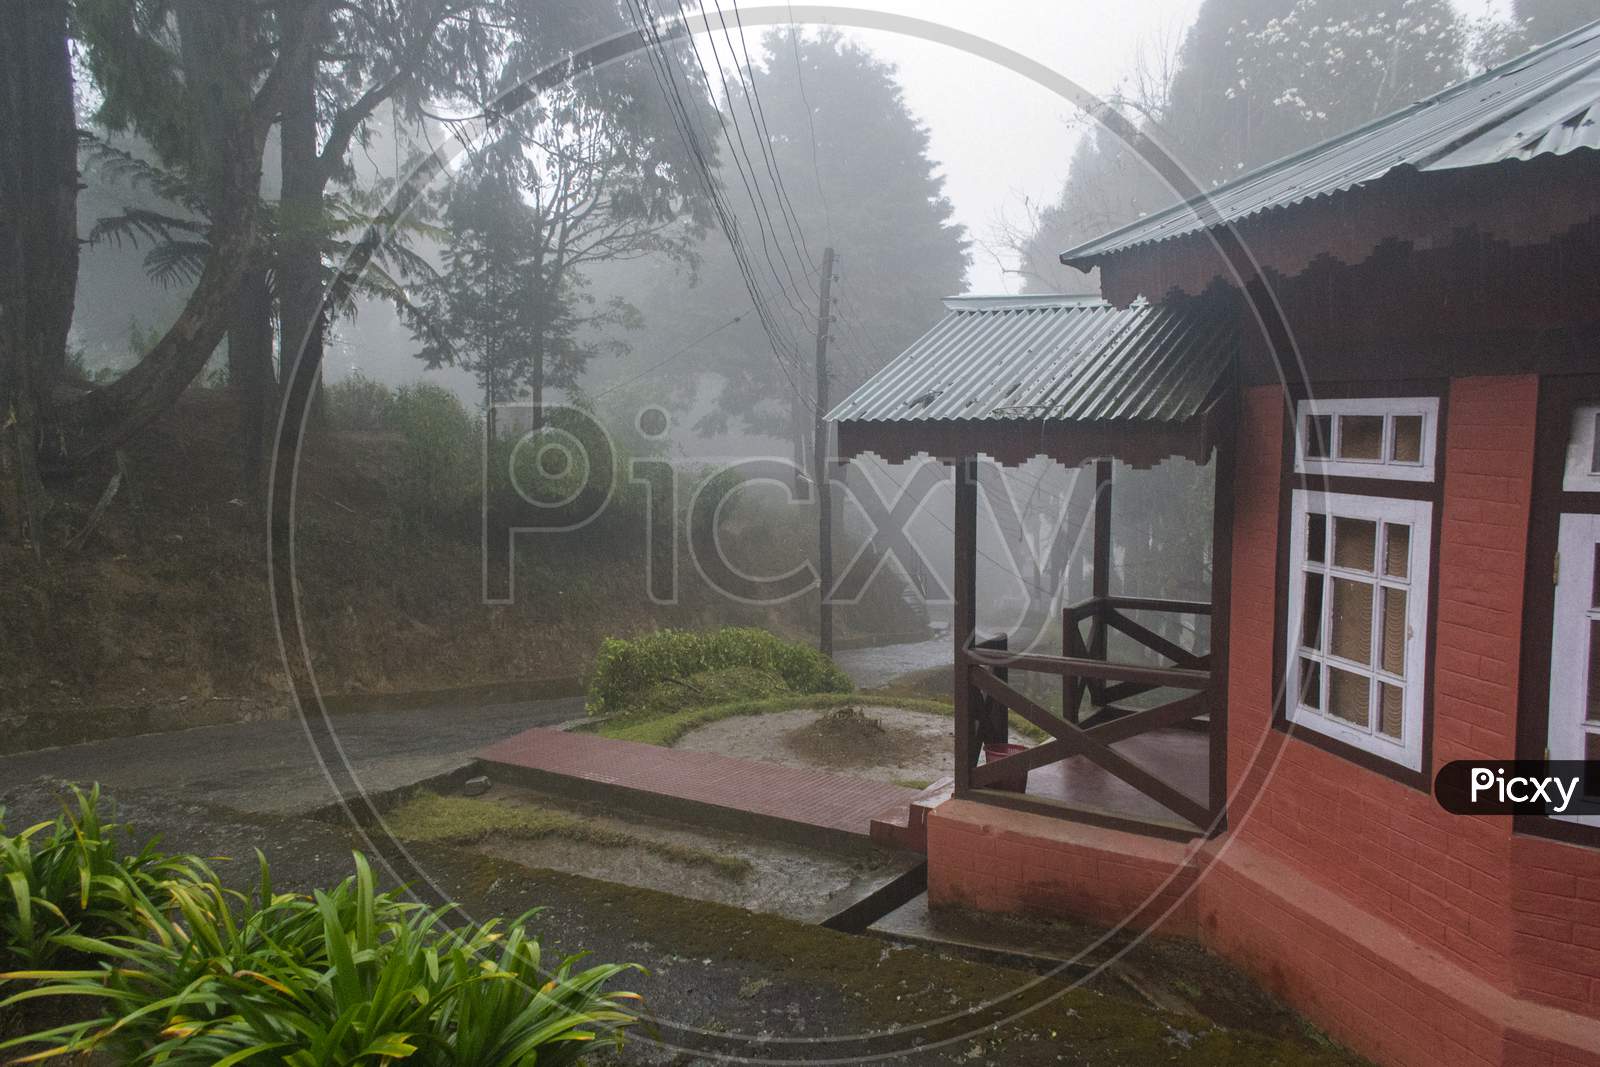 Misty And Fogy Morning With Beautiful Cottages